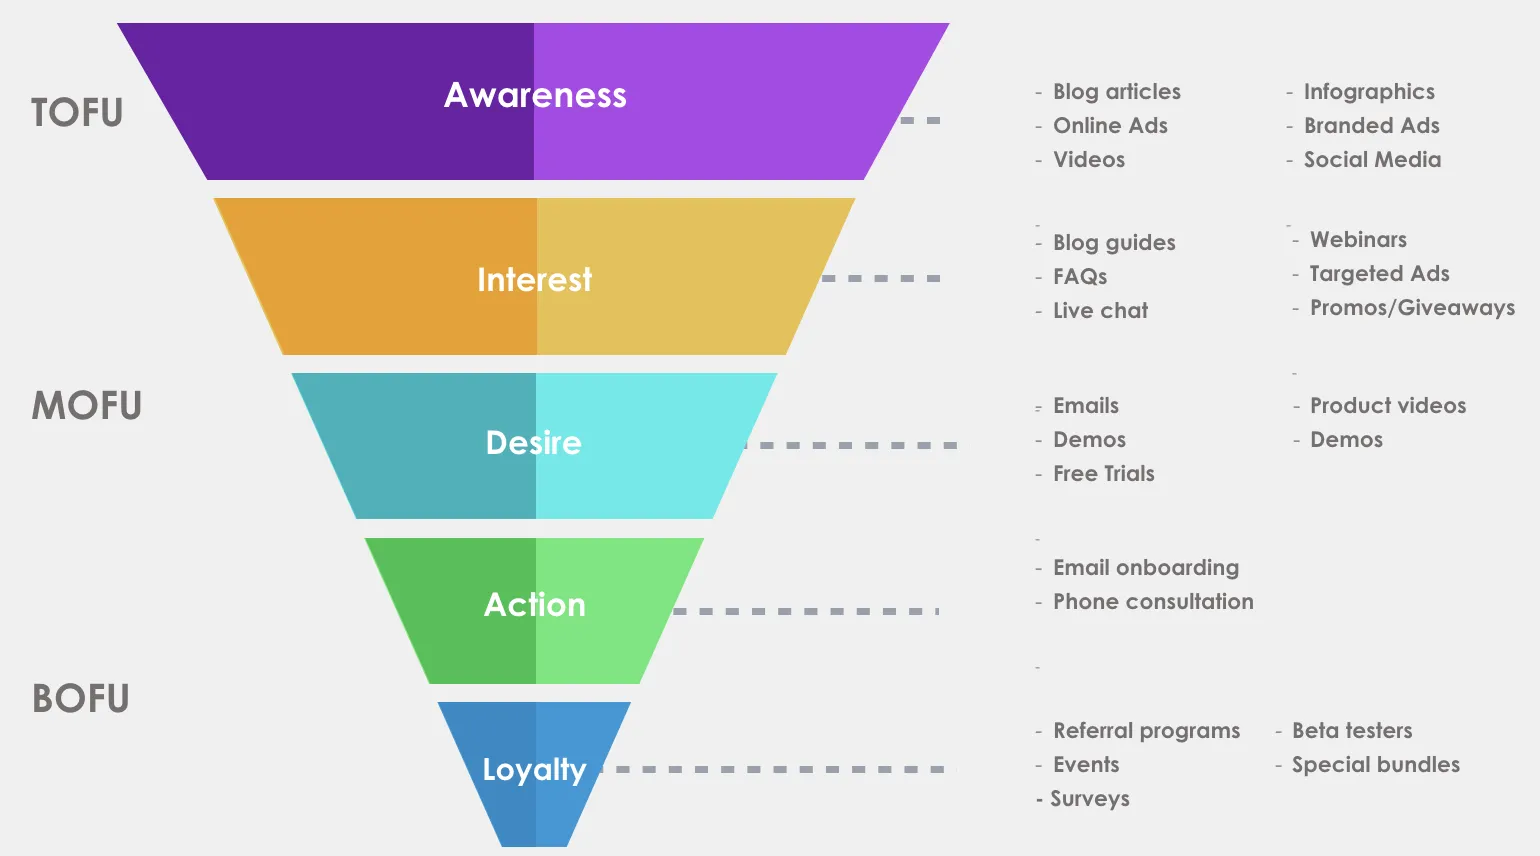 acquisition funnels help improve brand awareness, interest and lead to customer loyalty